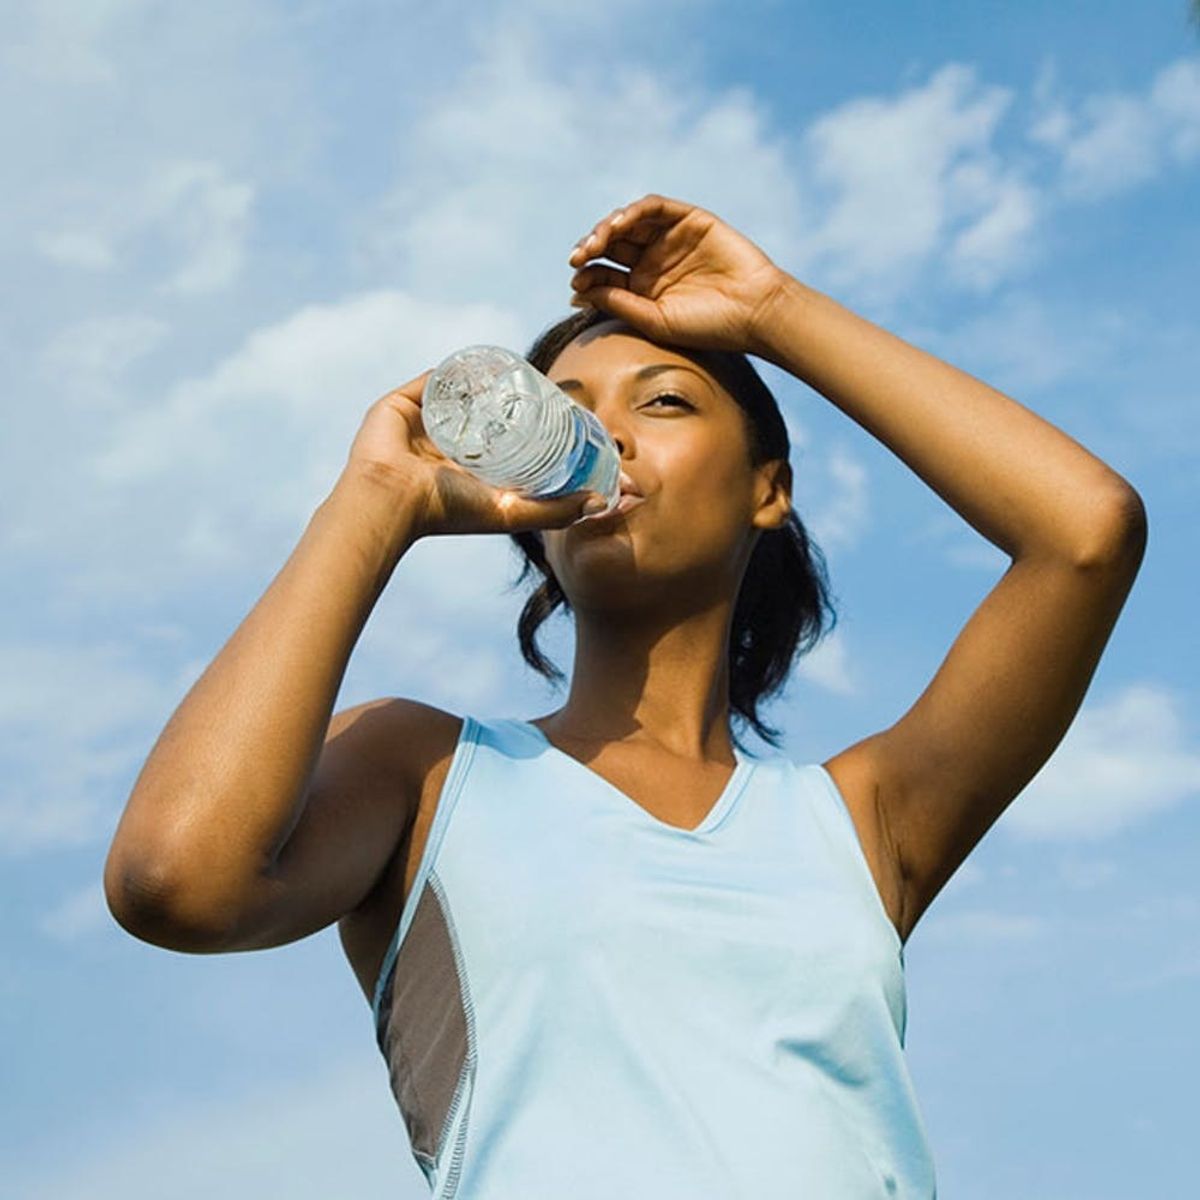 6 Tips for Staying Healthy and Cool in the Summer Heat